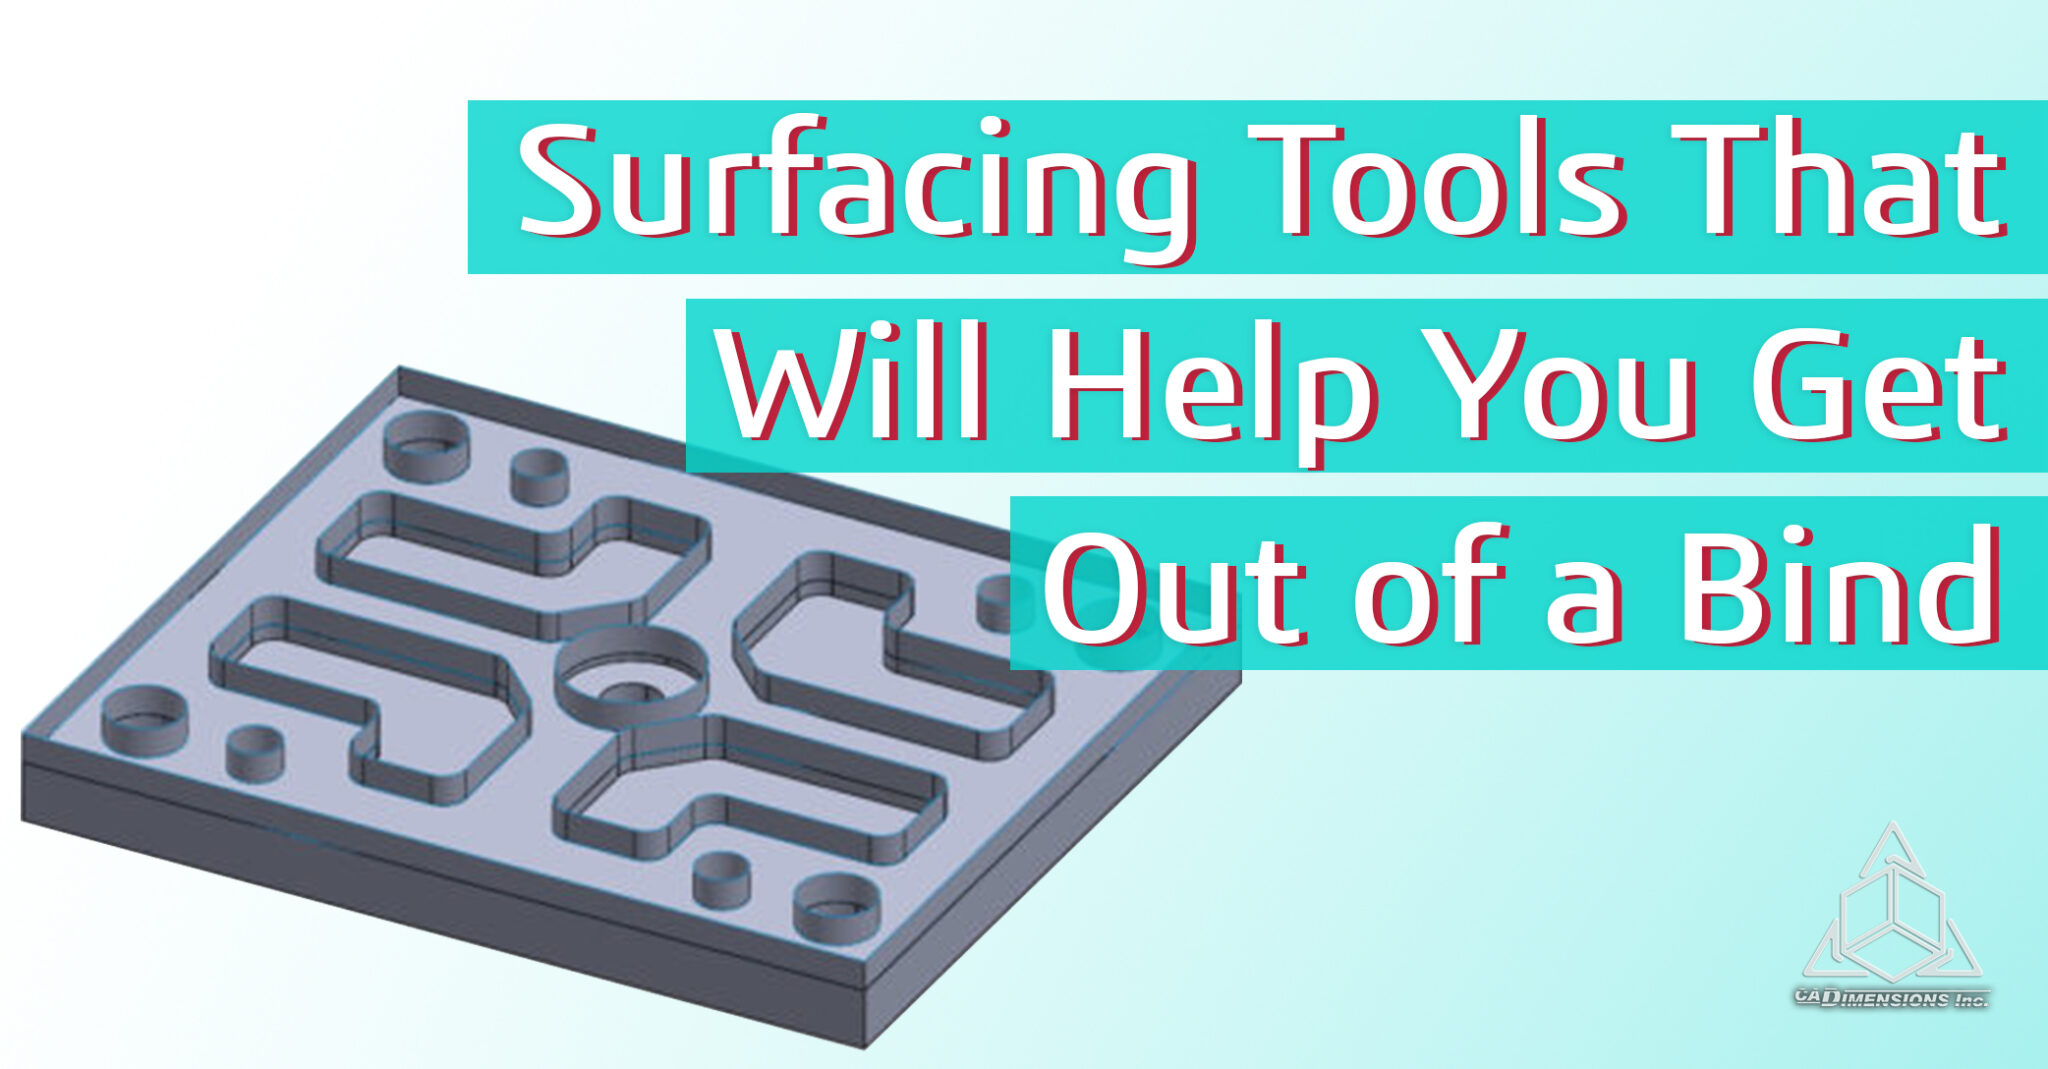 Surfacing Approach to Import Modifications - Part 1